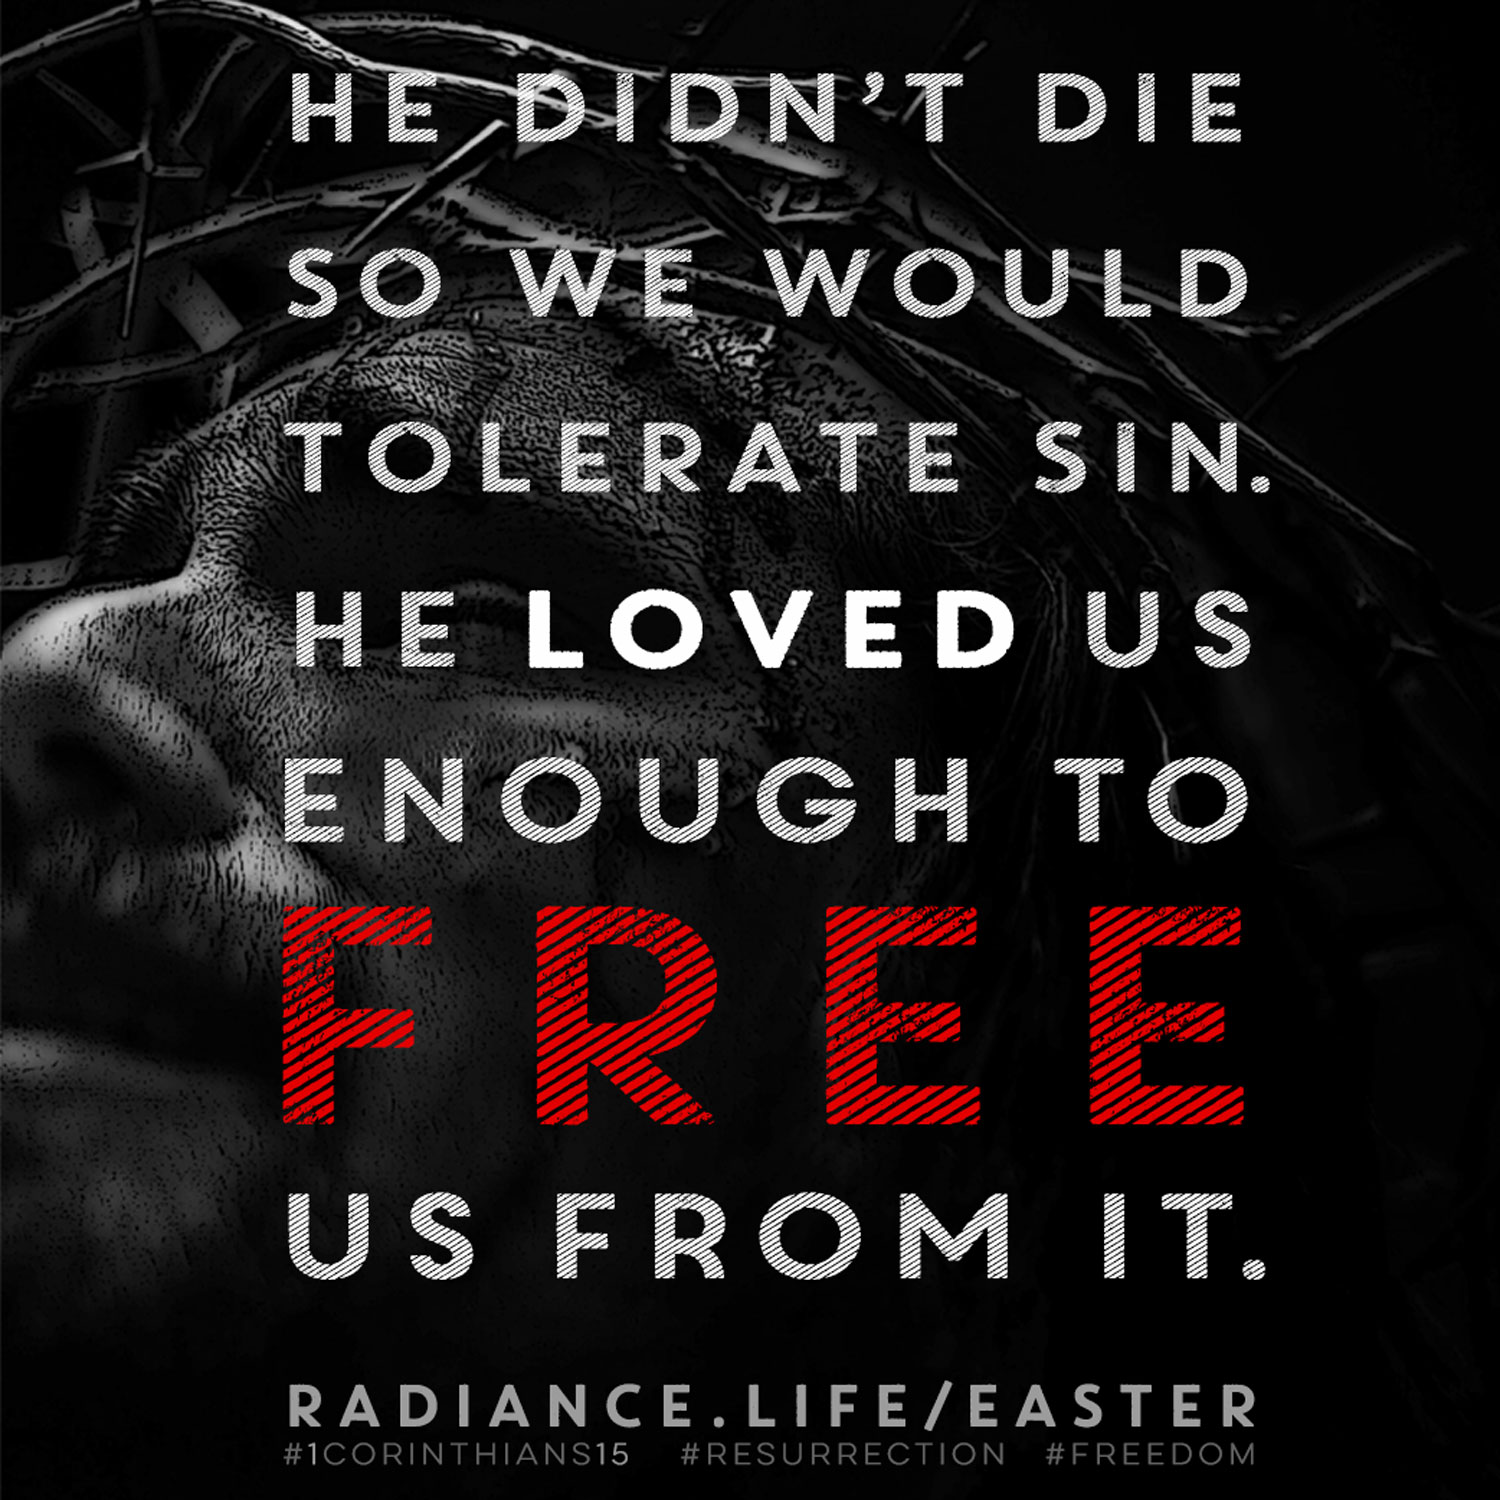 Easter - The Radiance Foundation